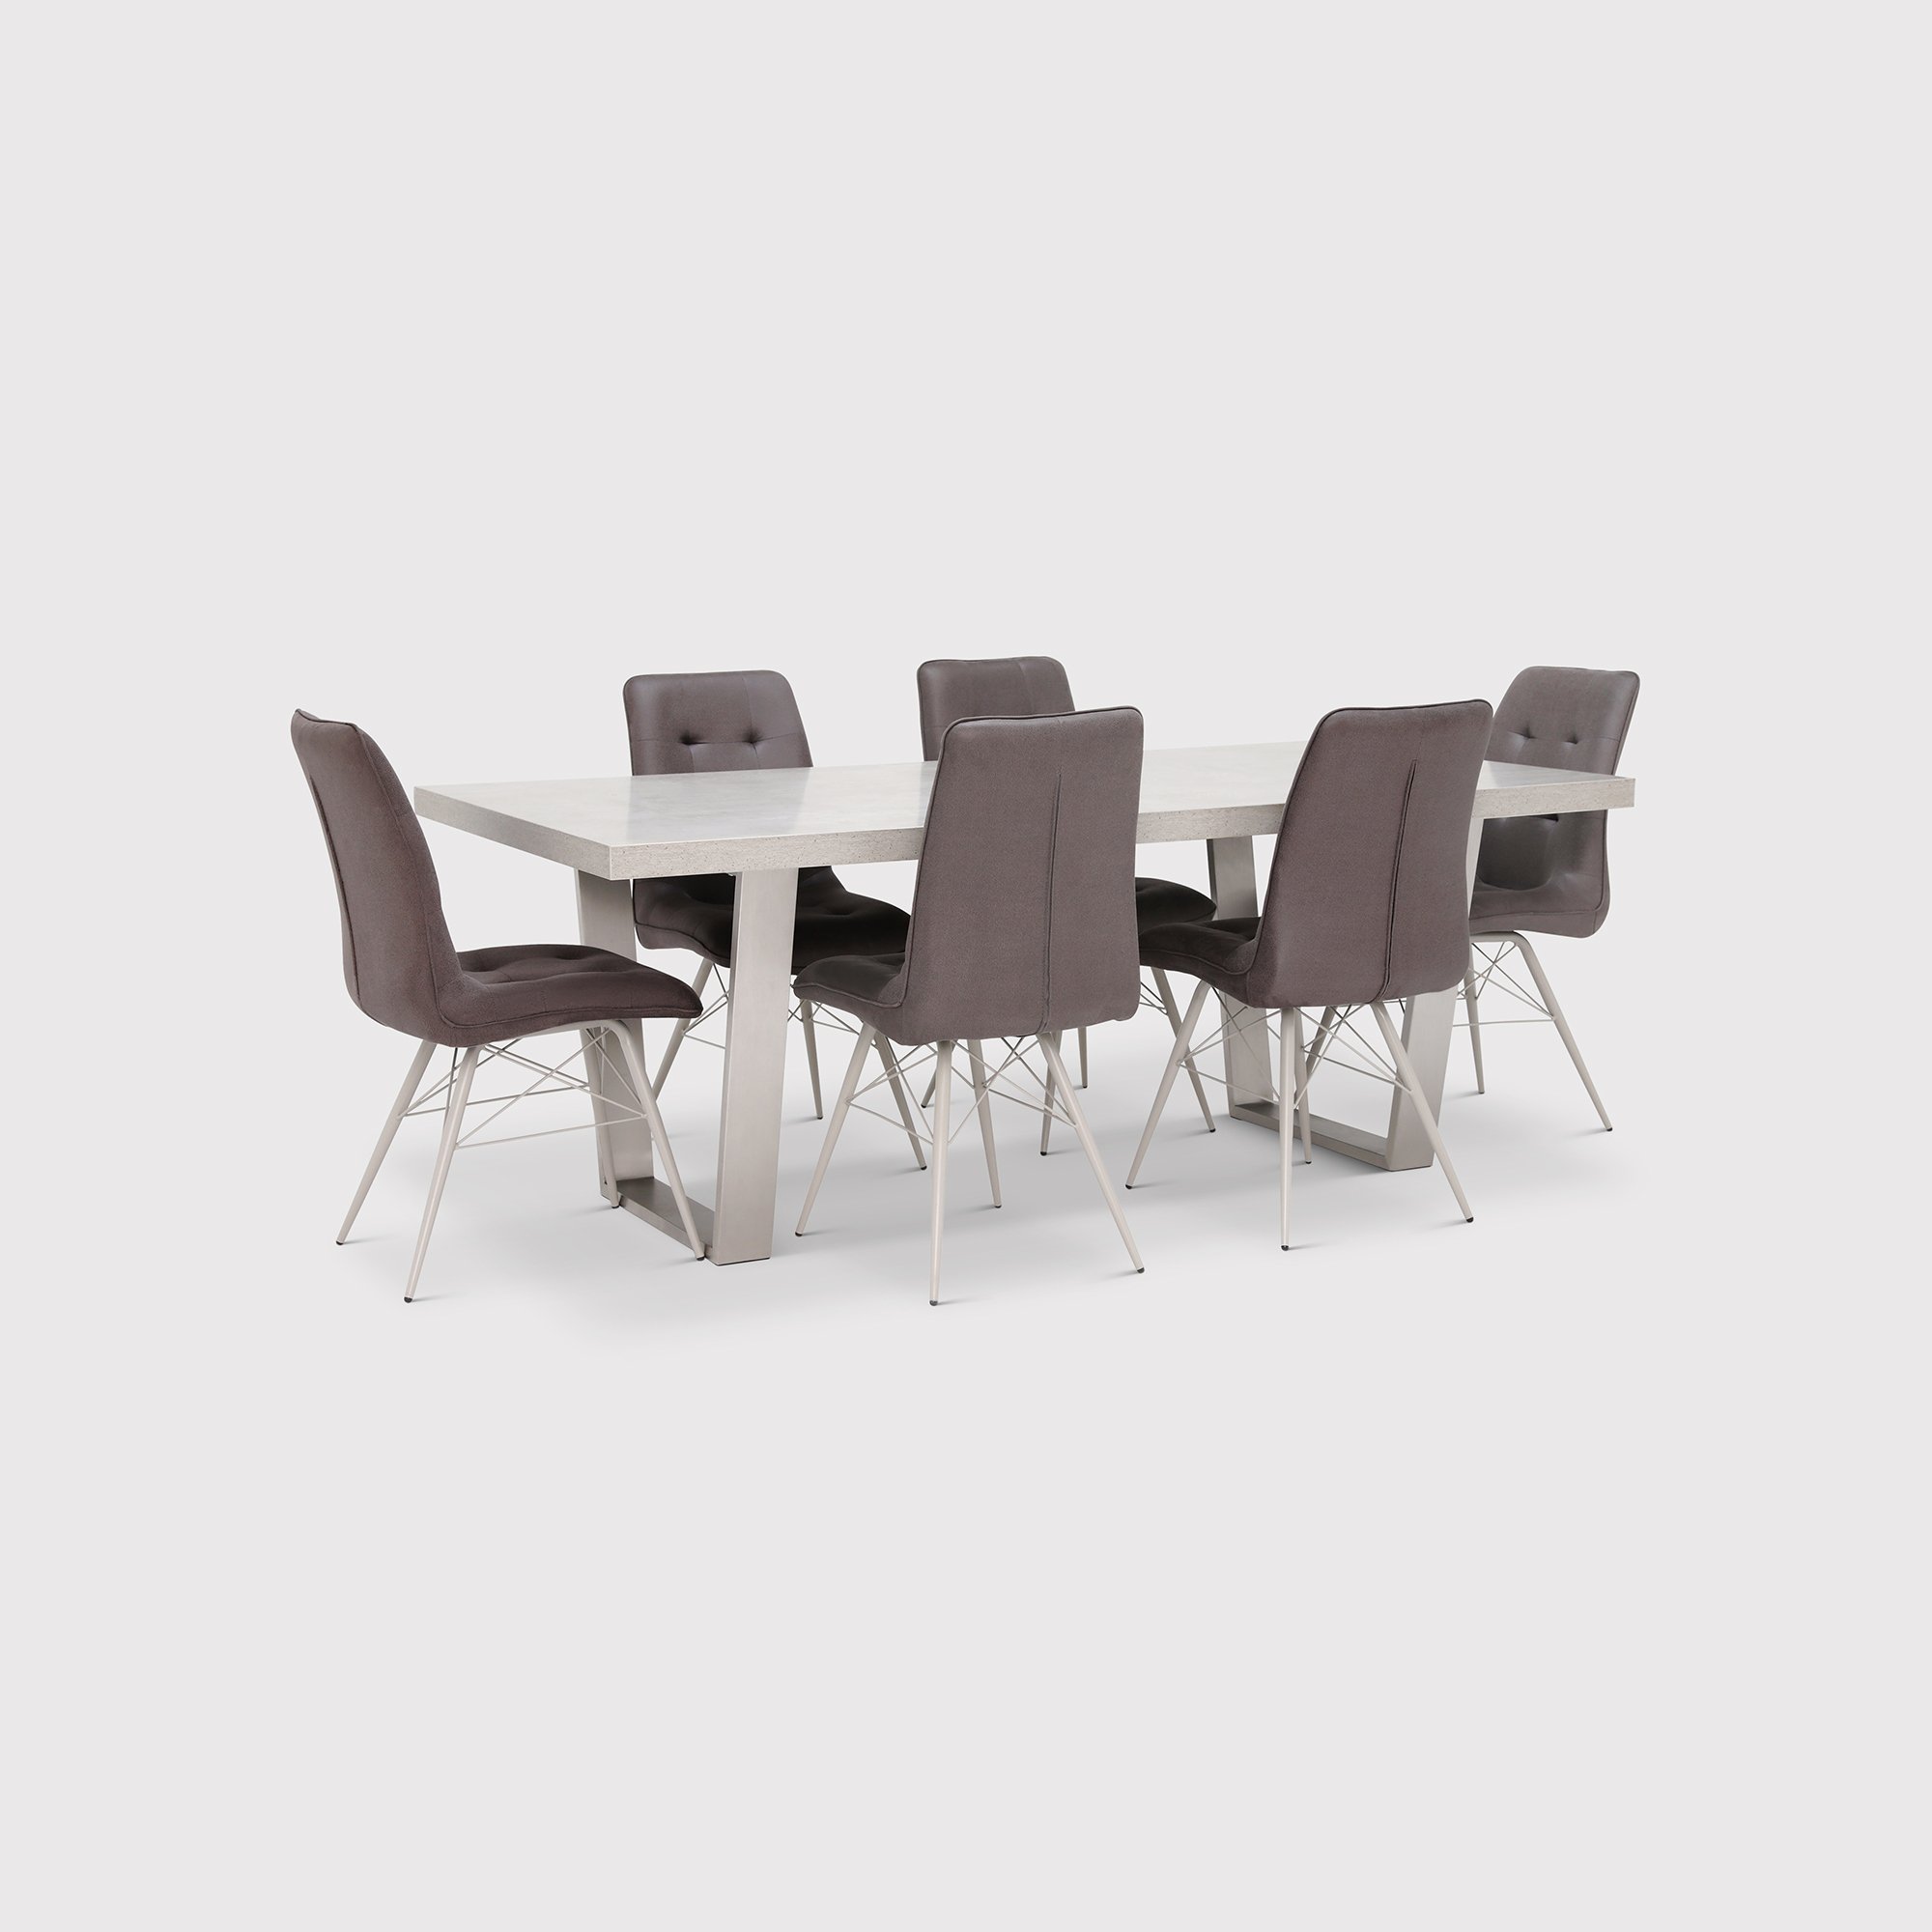 Halmstad Dining Table & 6 Hix Chairs, Grey | Barker & Stonehouse